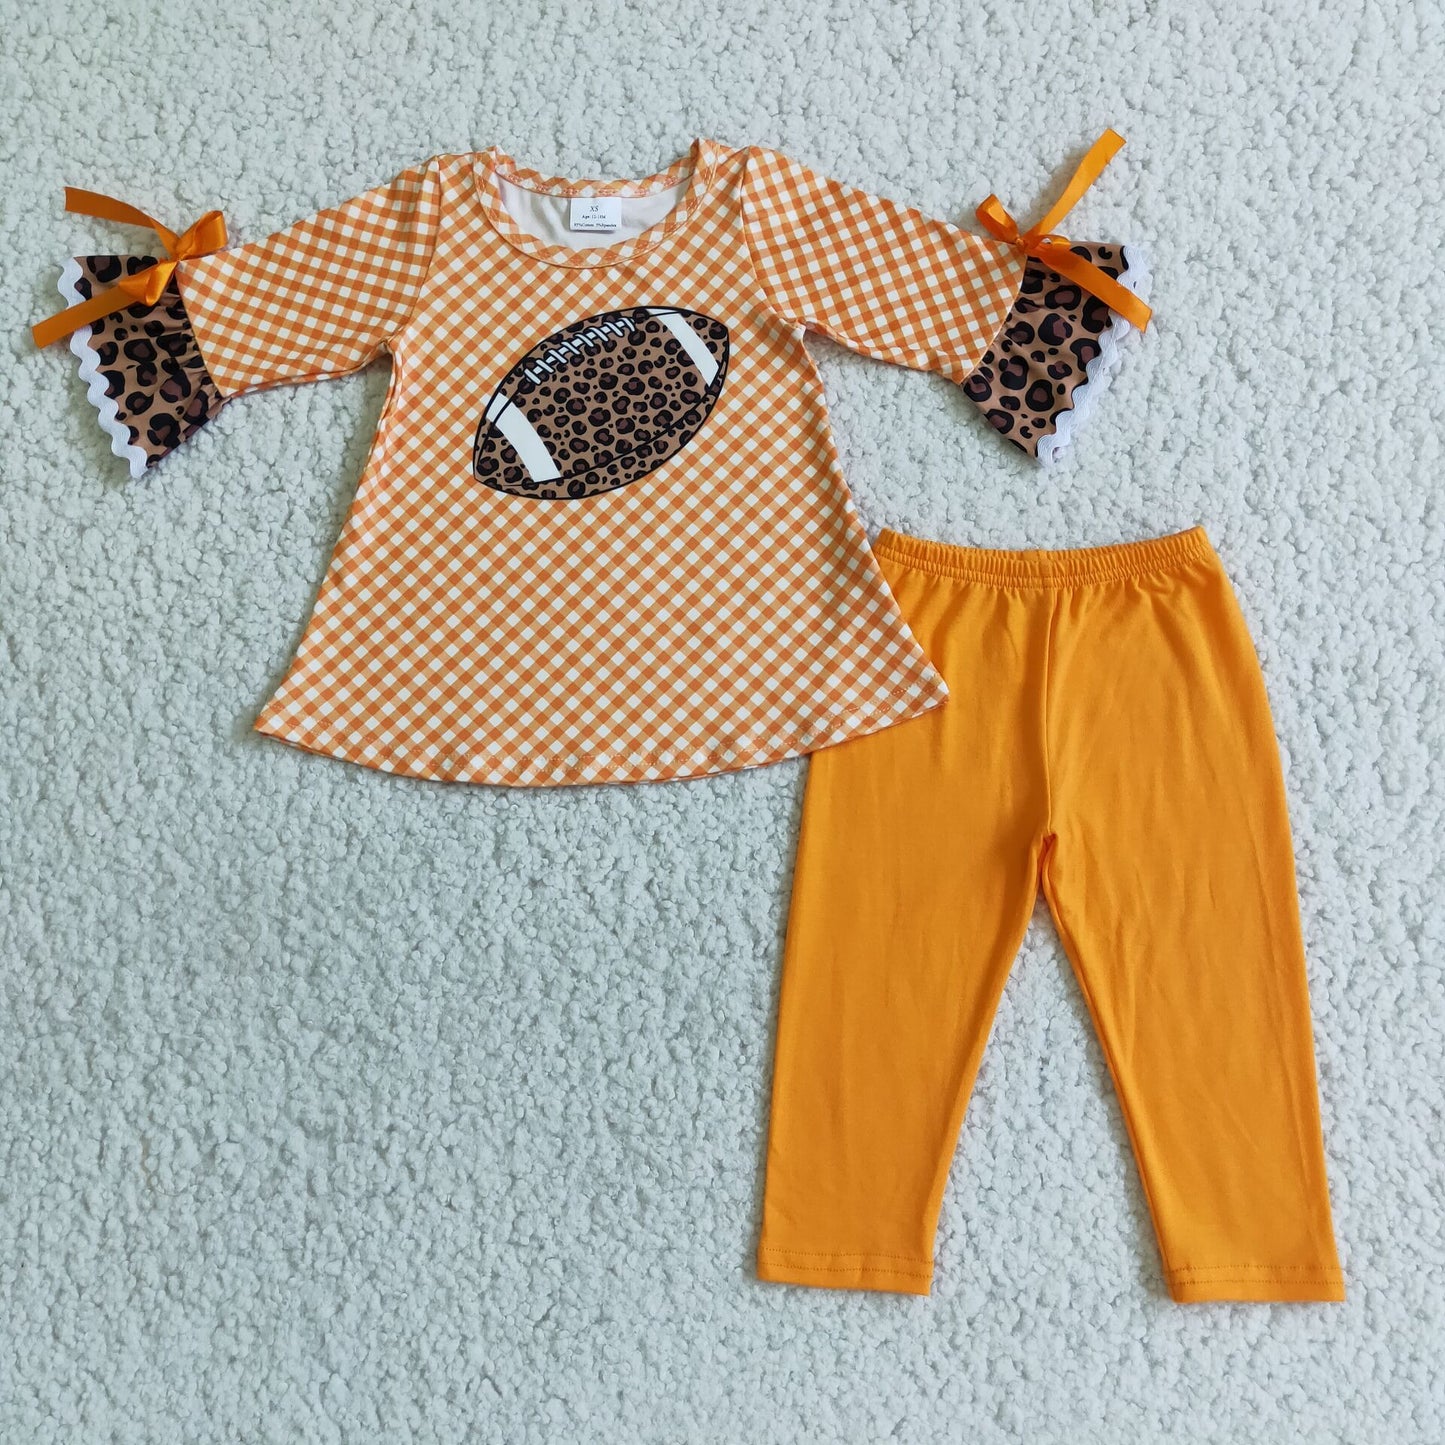 Baby girls football outfit